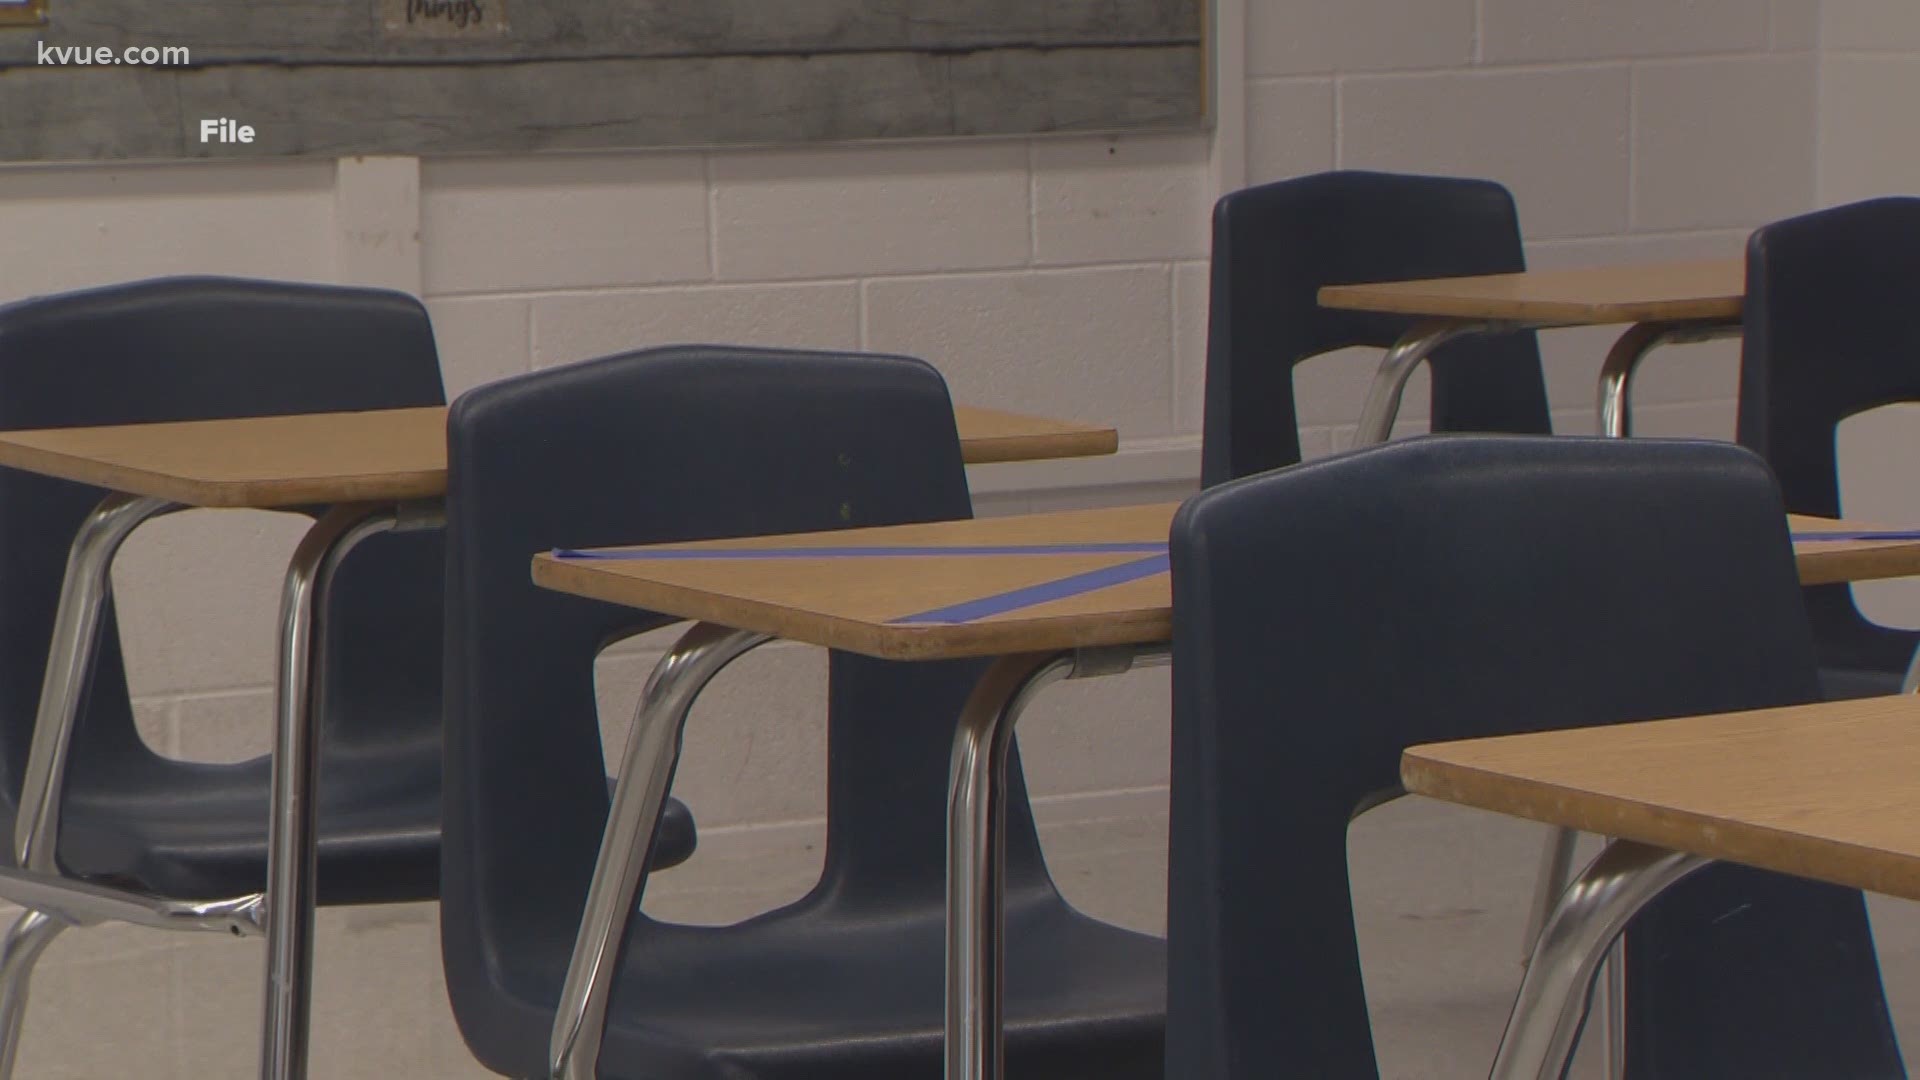 Many school districts will have in-person classes for the first time next week.